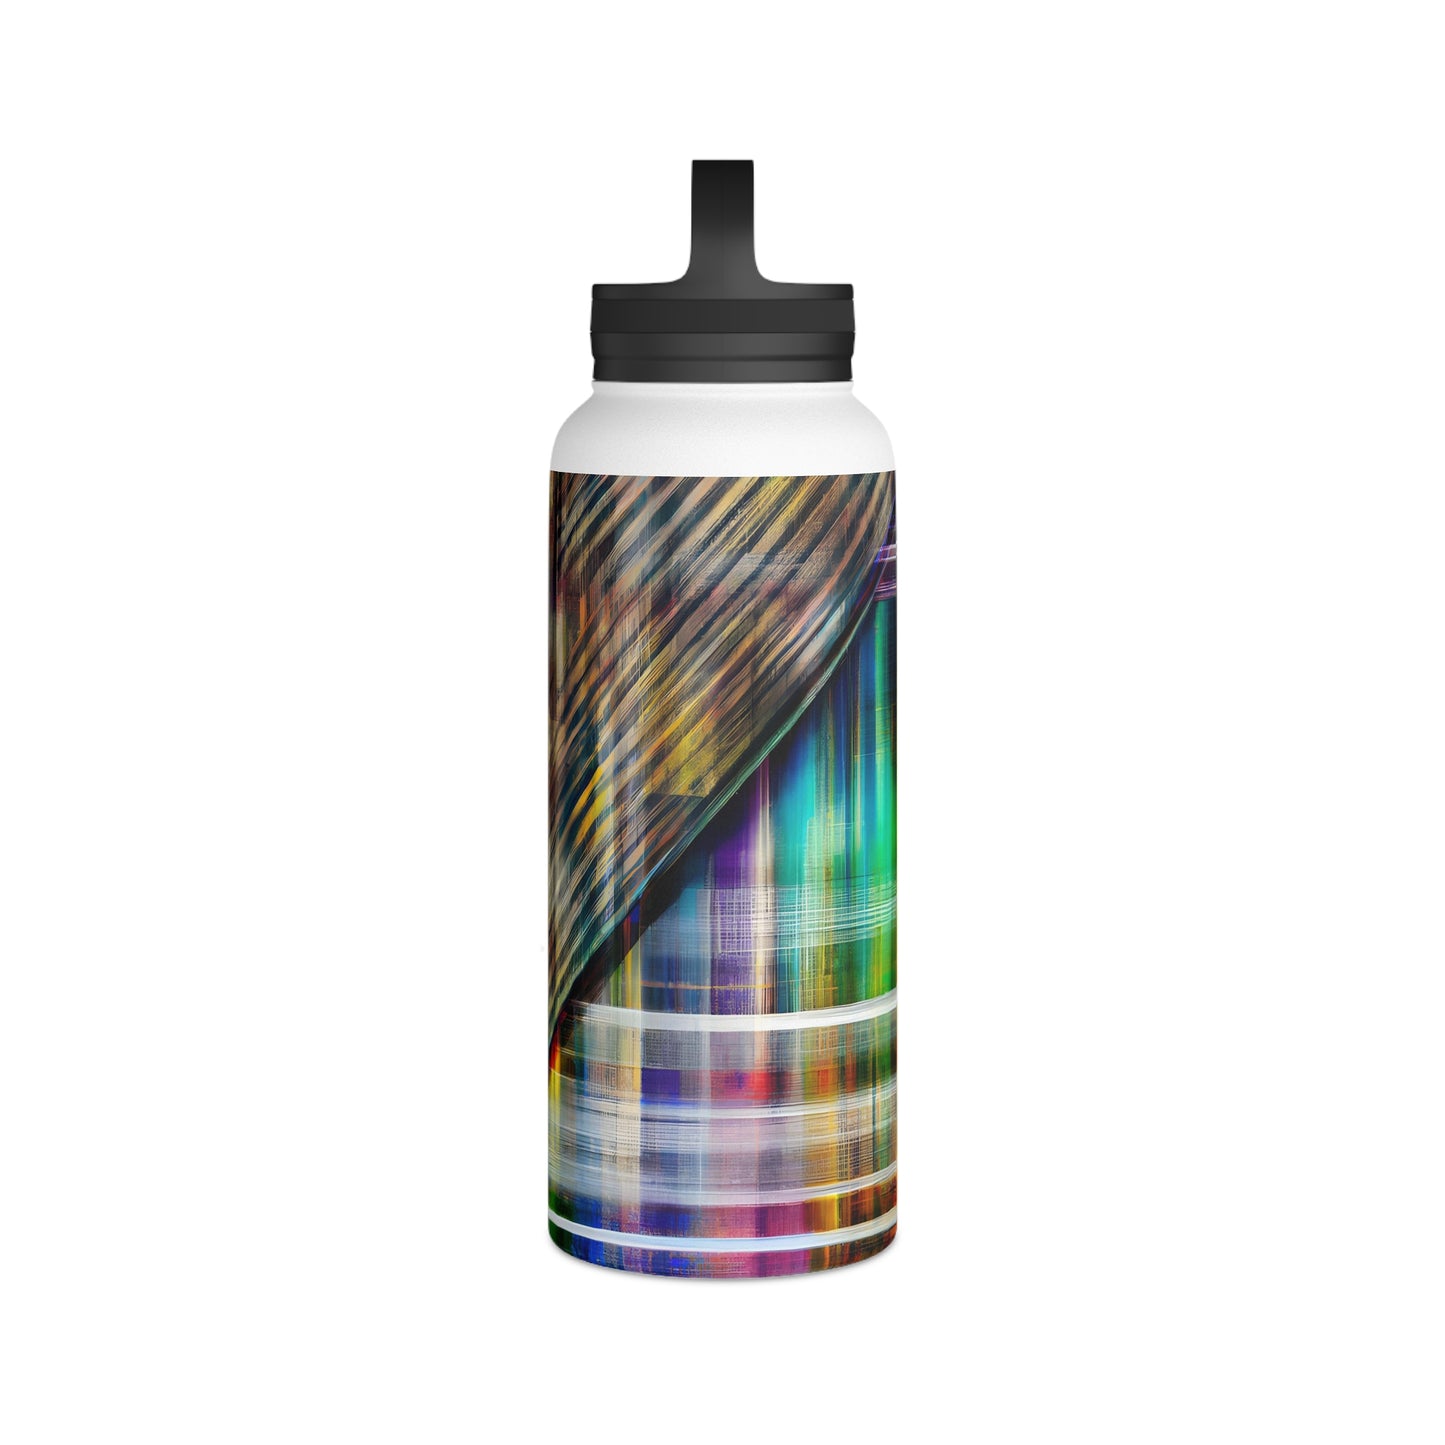 Marshall Sobel - Strong Force, Abstractly - Stainless Steel Water Bottle